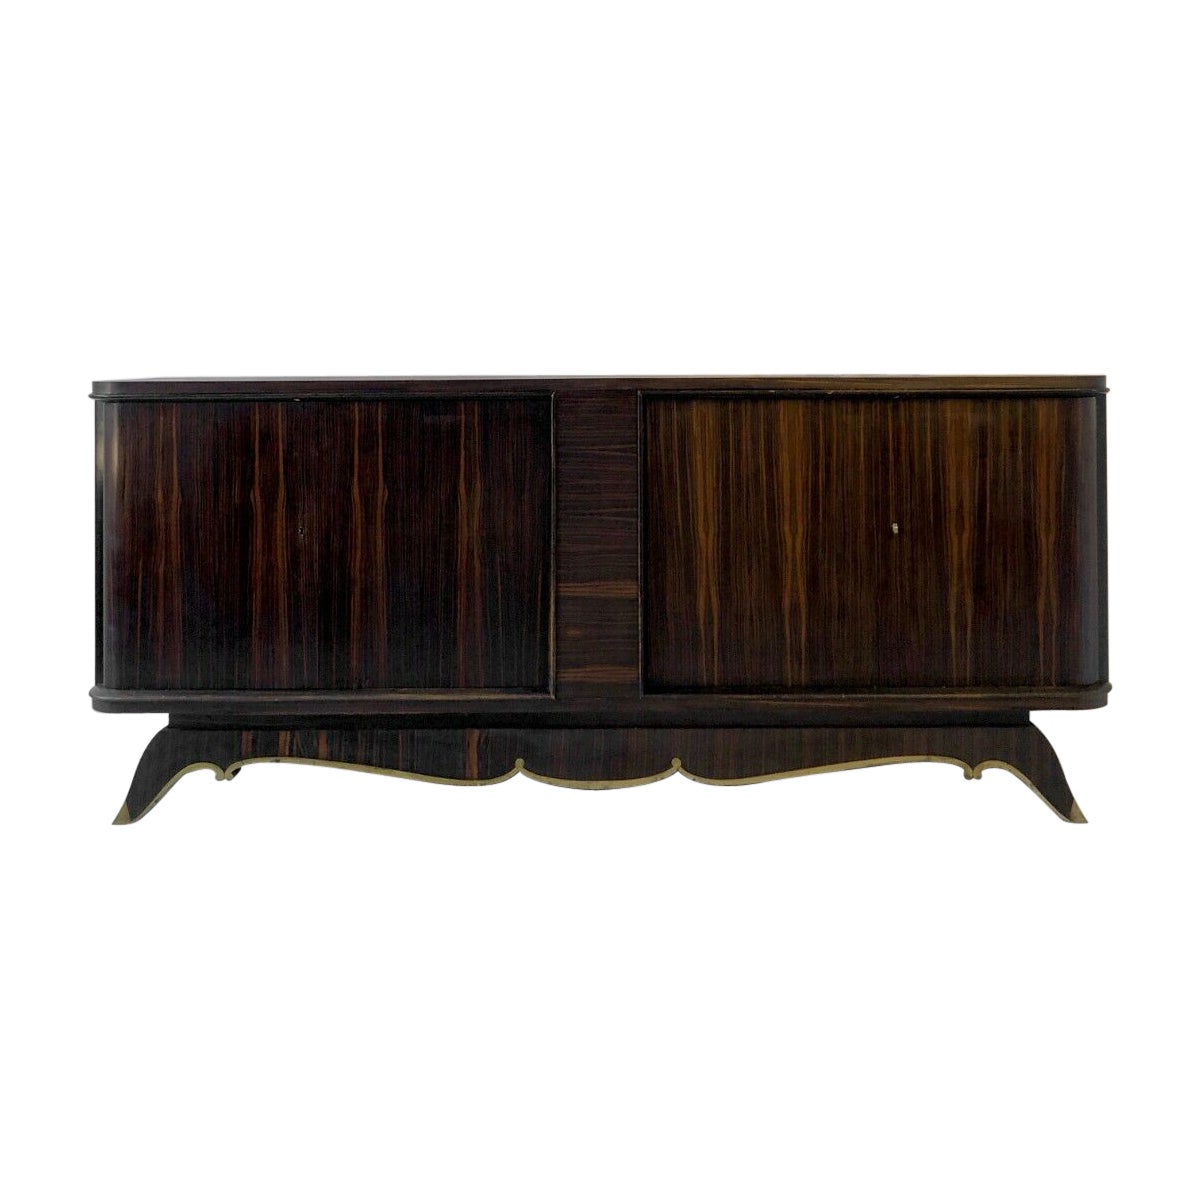 A Wide Spectacular ART DECO NEO-CLASSICAL SIDEBOARD by JULES LELEU, France 1930